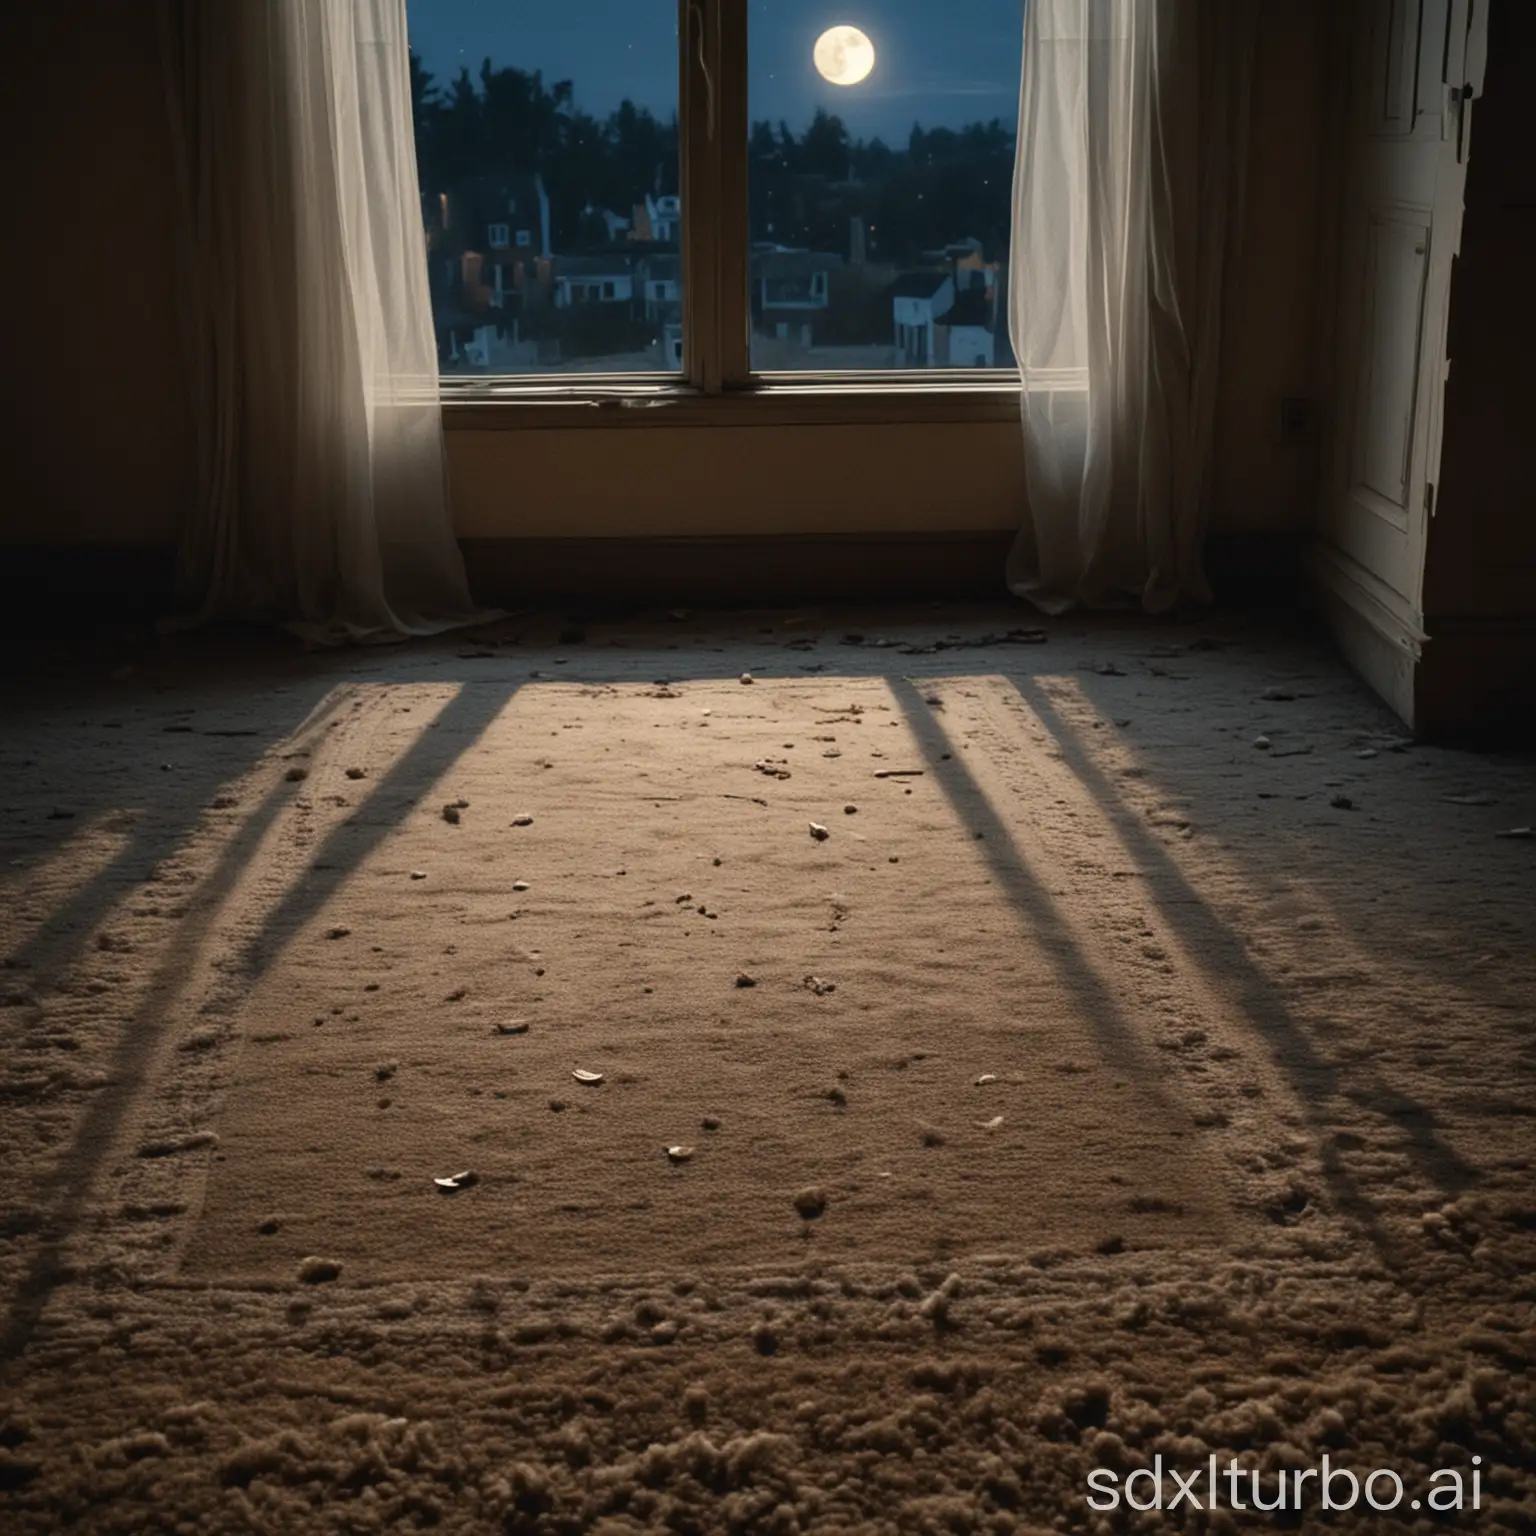 A small room, with a worn-out carpet on the floor, full moon outside the window, faint moonlight falls on the carpet